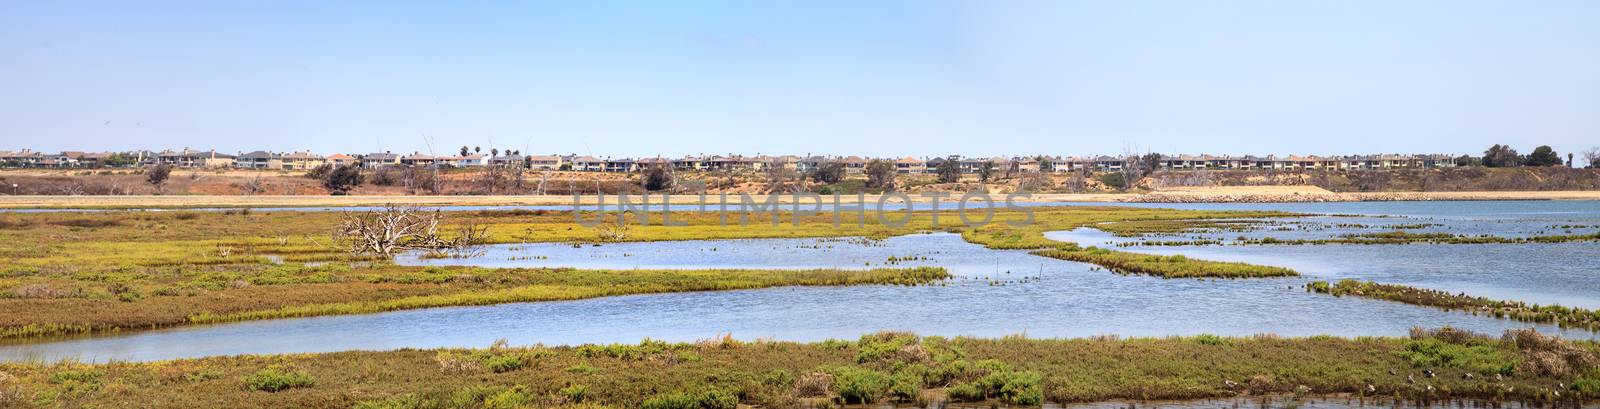 Peaceful and tranquil marsh of Bolsa Chica wetlands by steffstarr